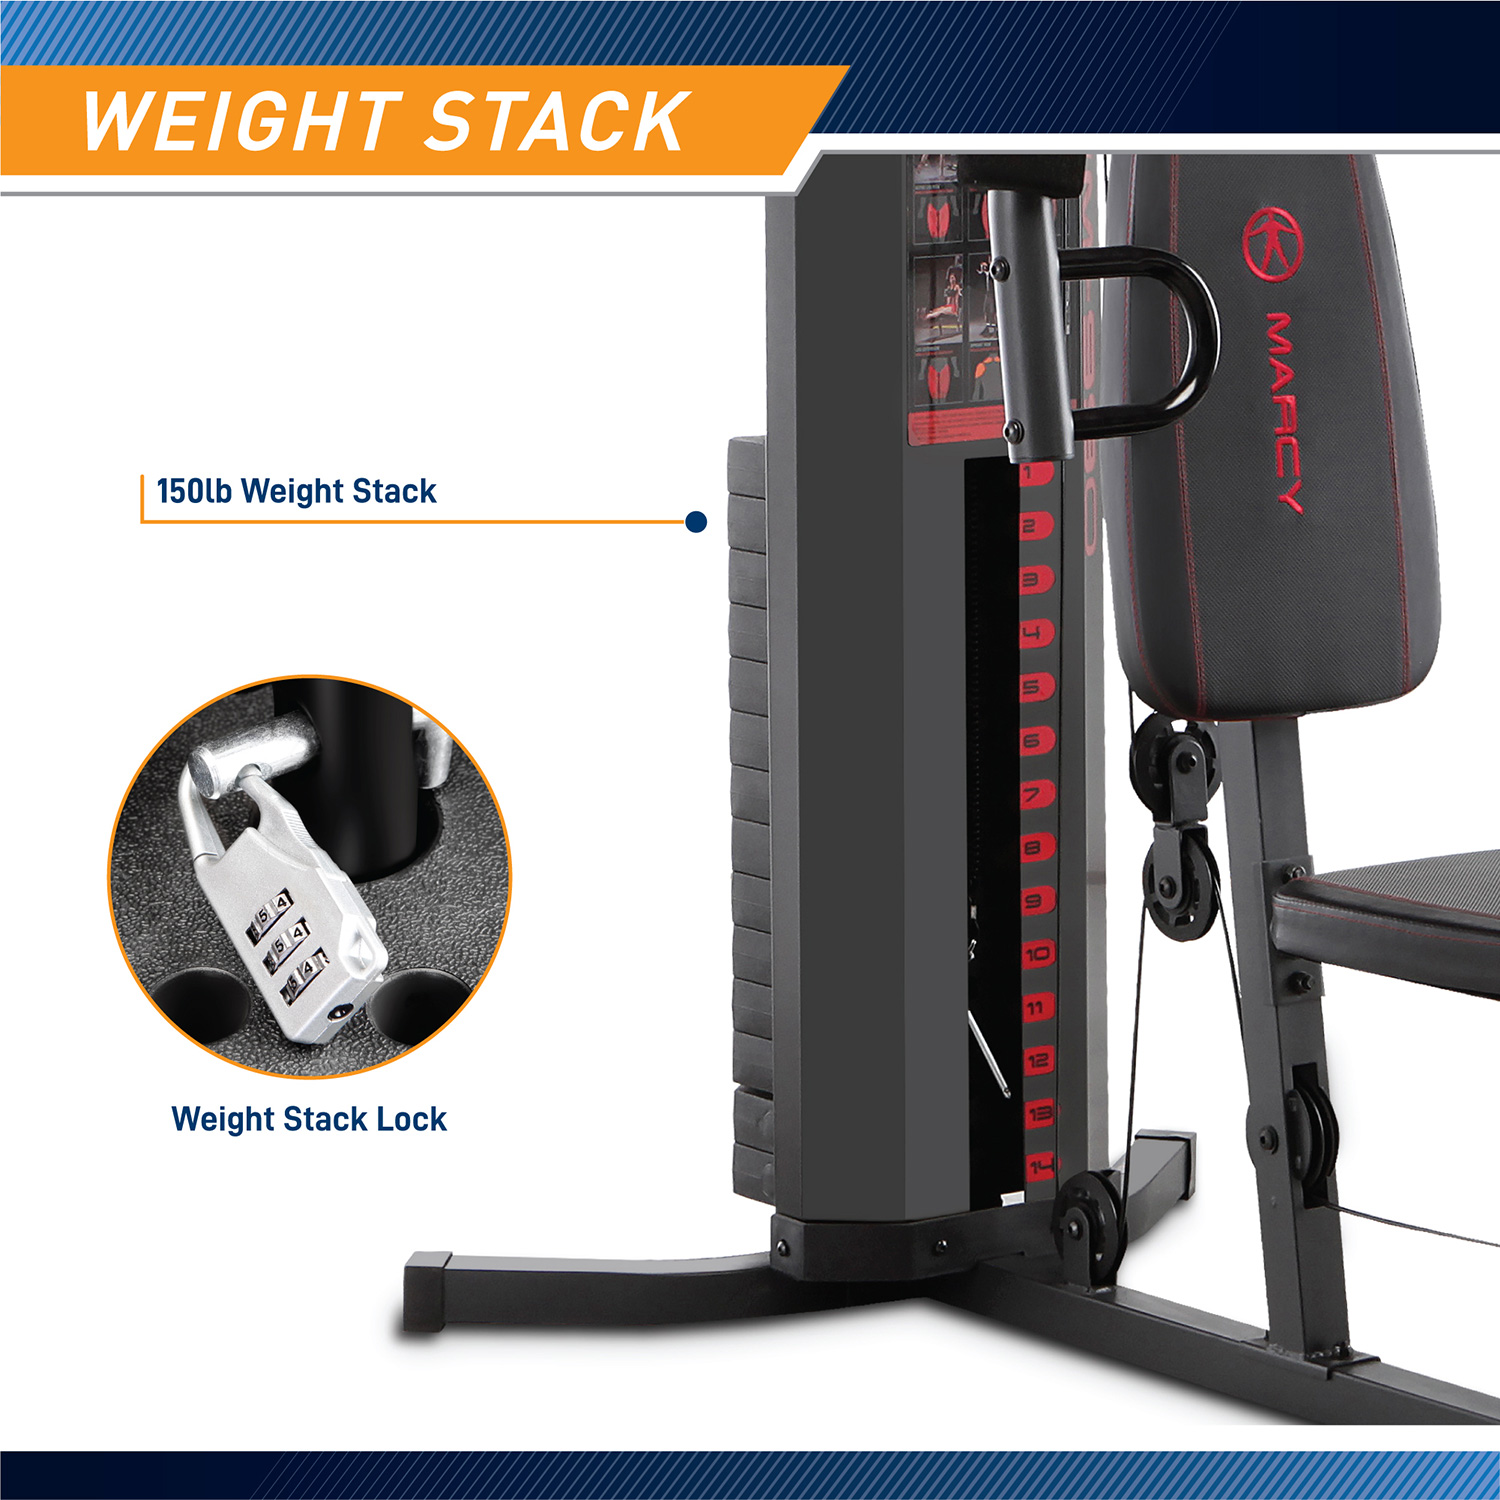 Buy the Best Home Gym - Marcy 150lb Stack - MWM-990 